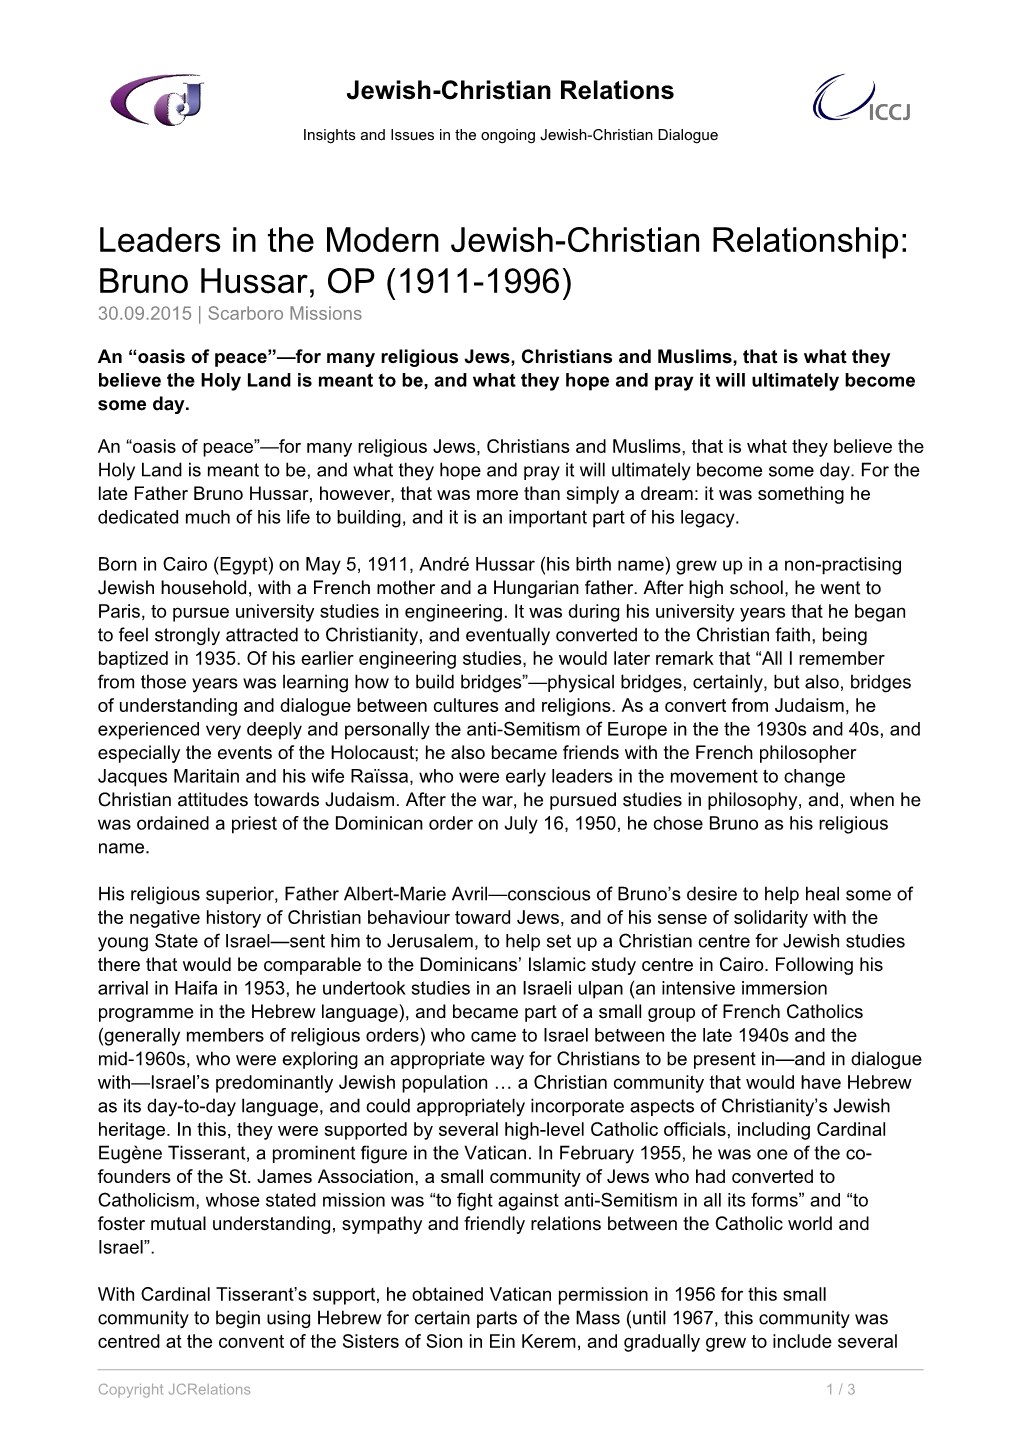 Leaders in the Modern Jewish-Christian Relationship: Bruno Hussar, OP (1911-1996) 30.09.2015 | Scarboro Missions